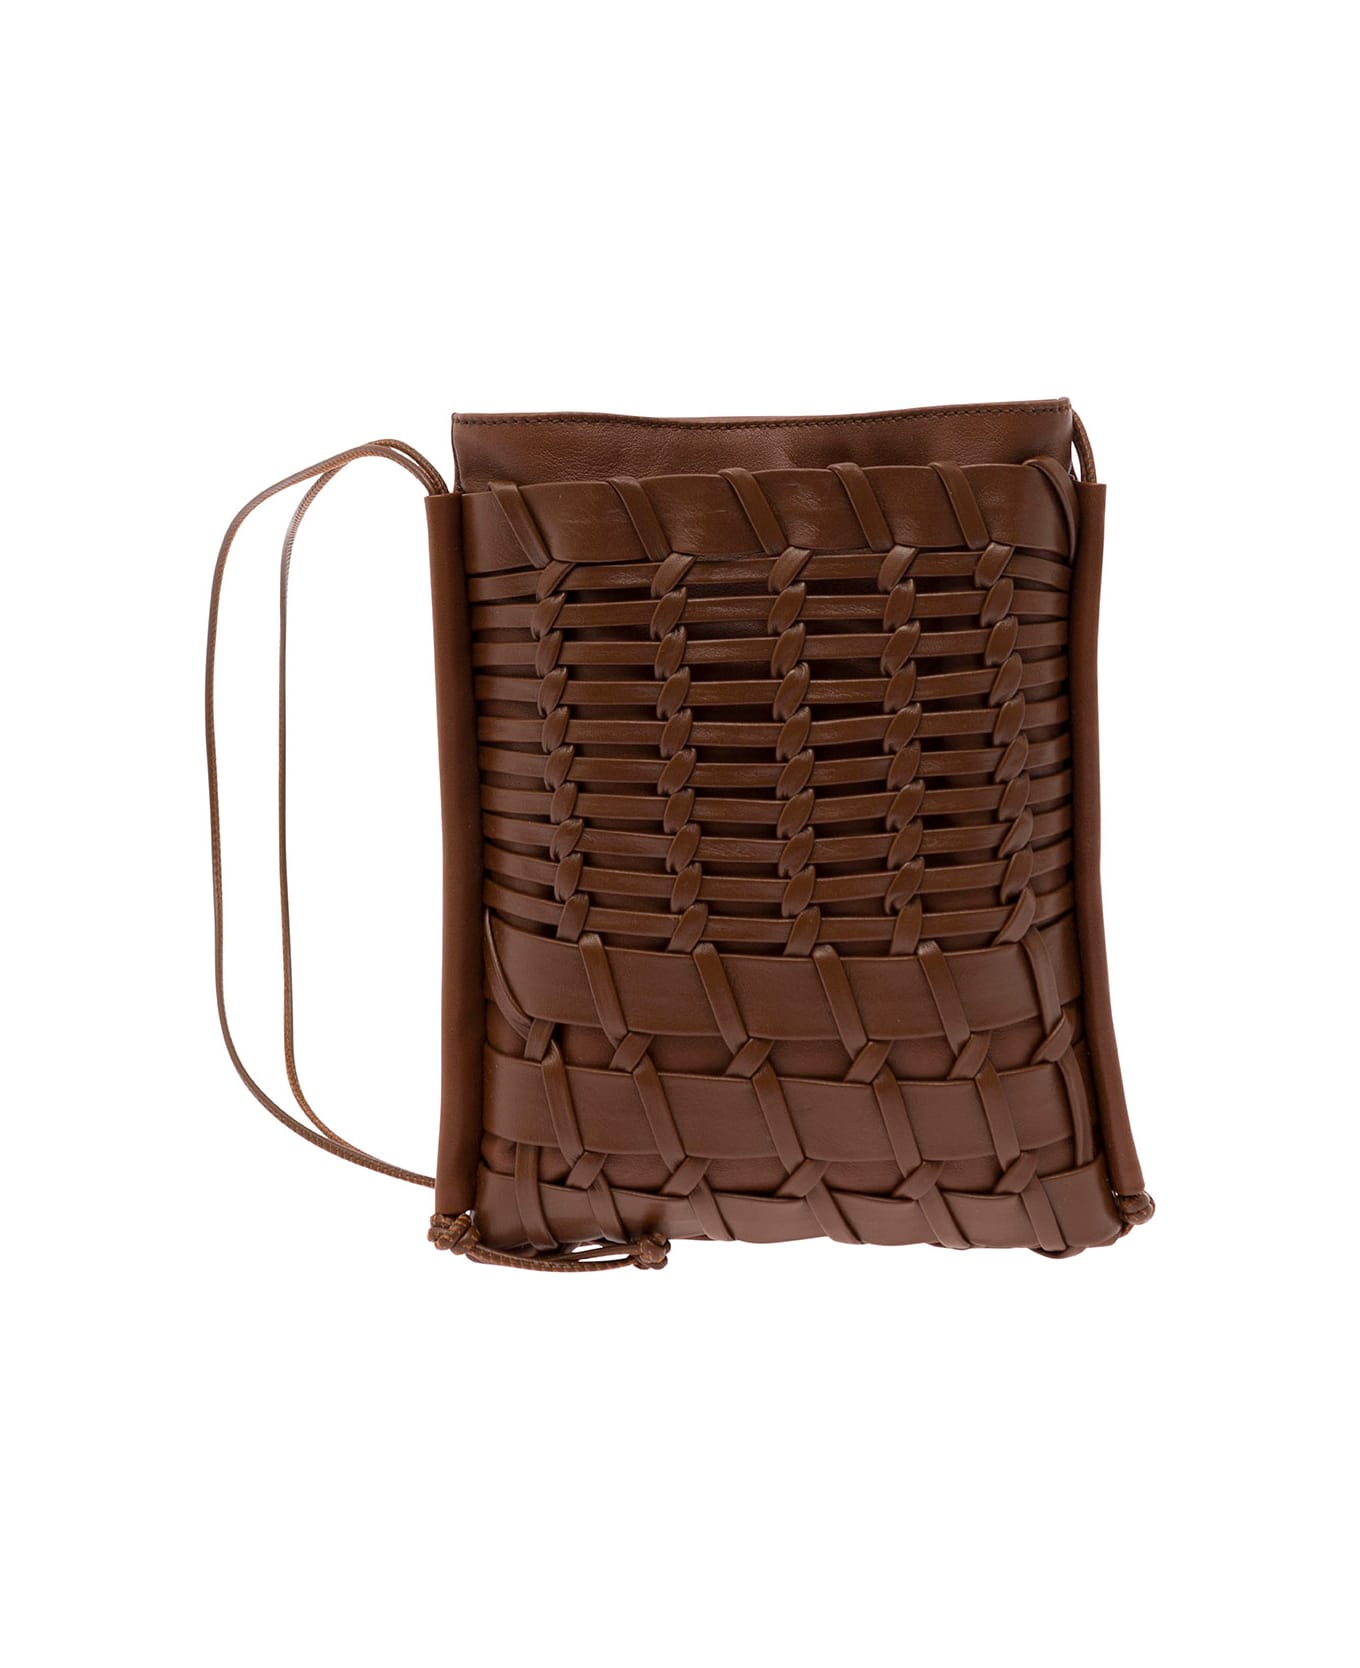 Hereu 'trena' Brown Flat Square Crossbody Bag In Handwoven Leather Woman - Brown バックパック